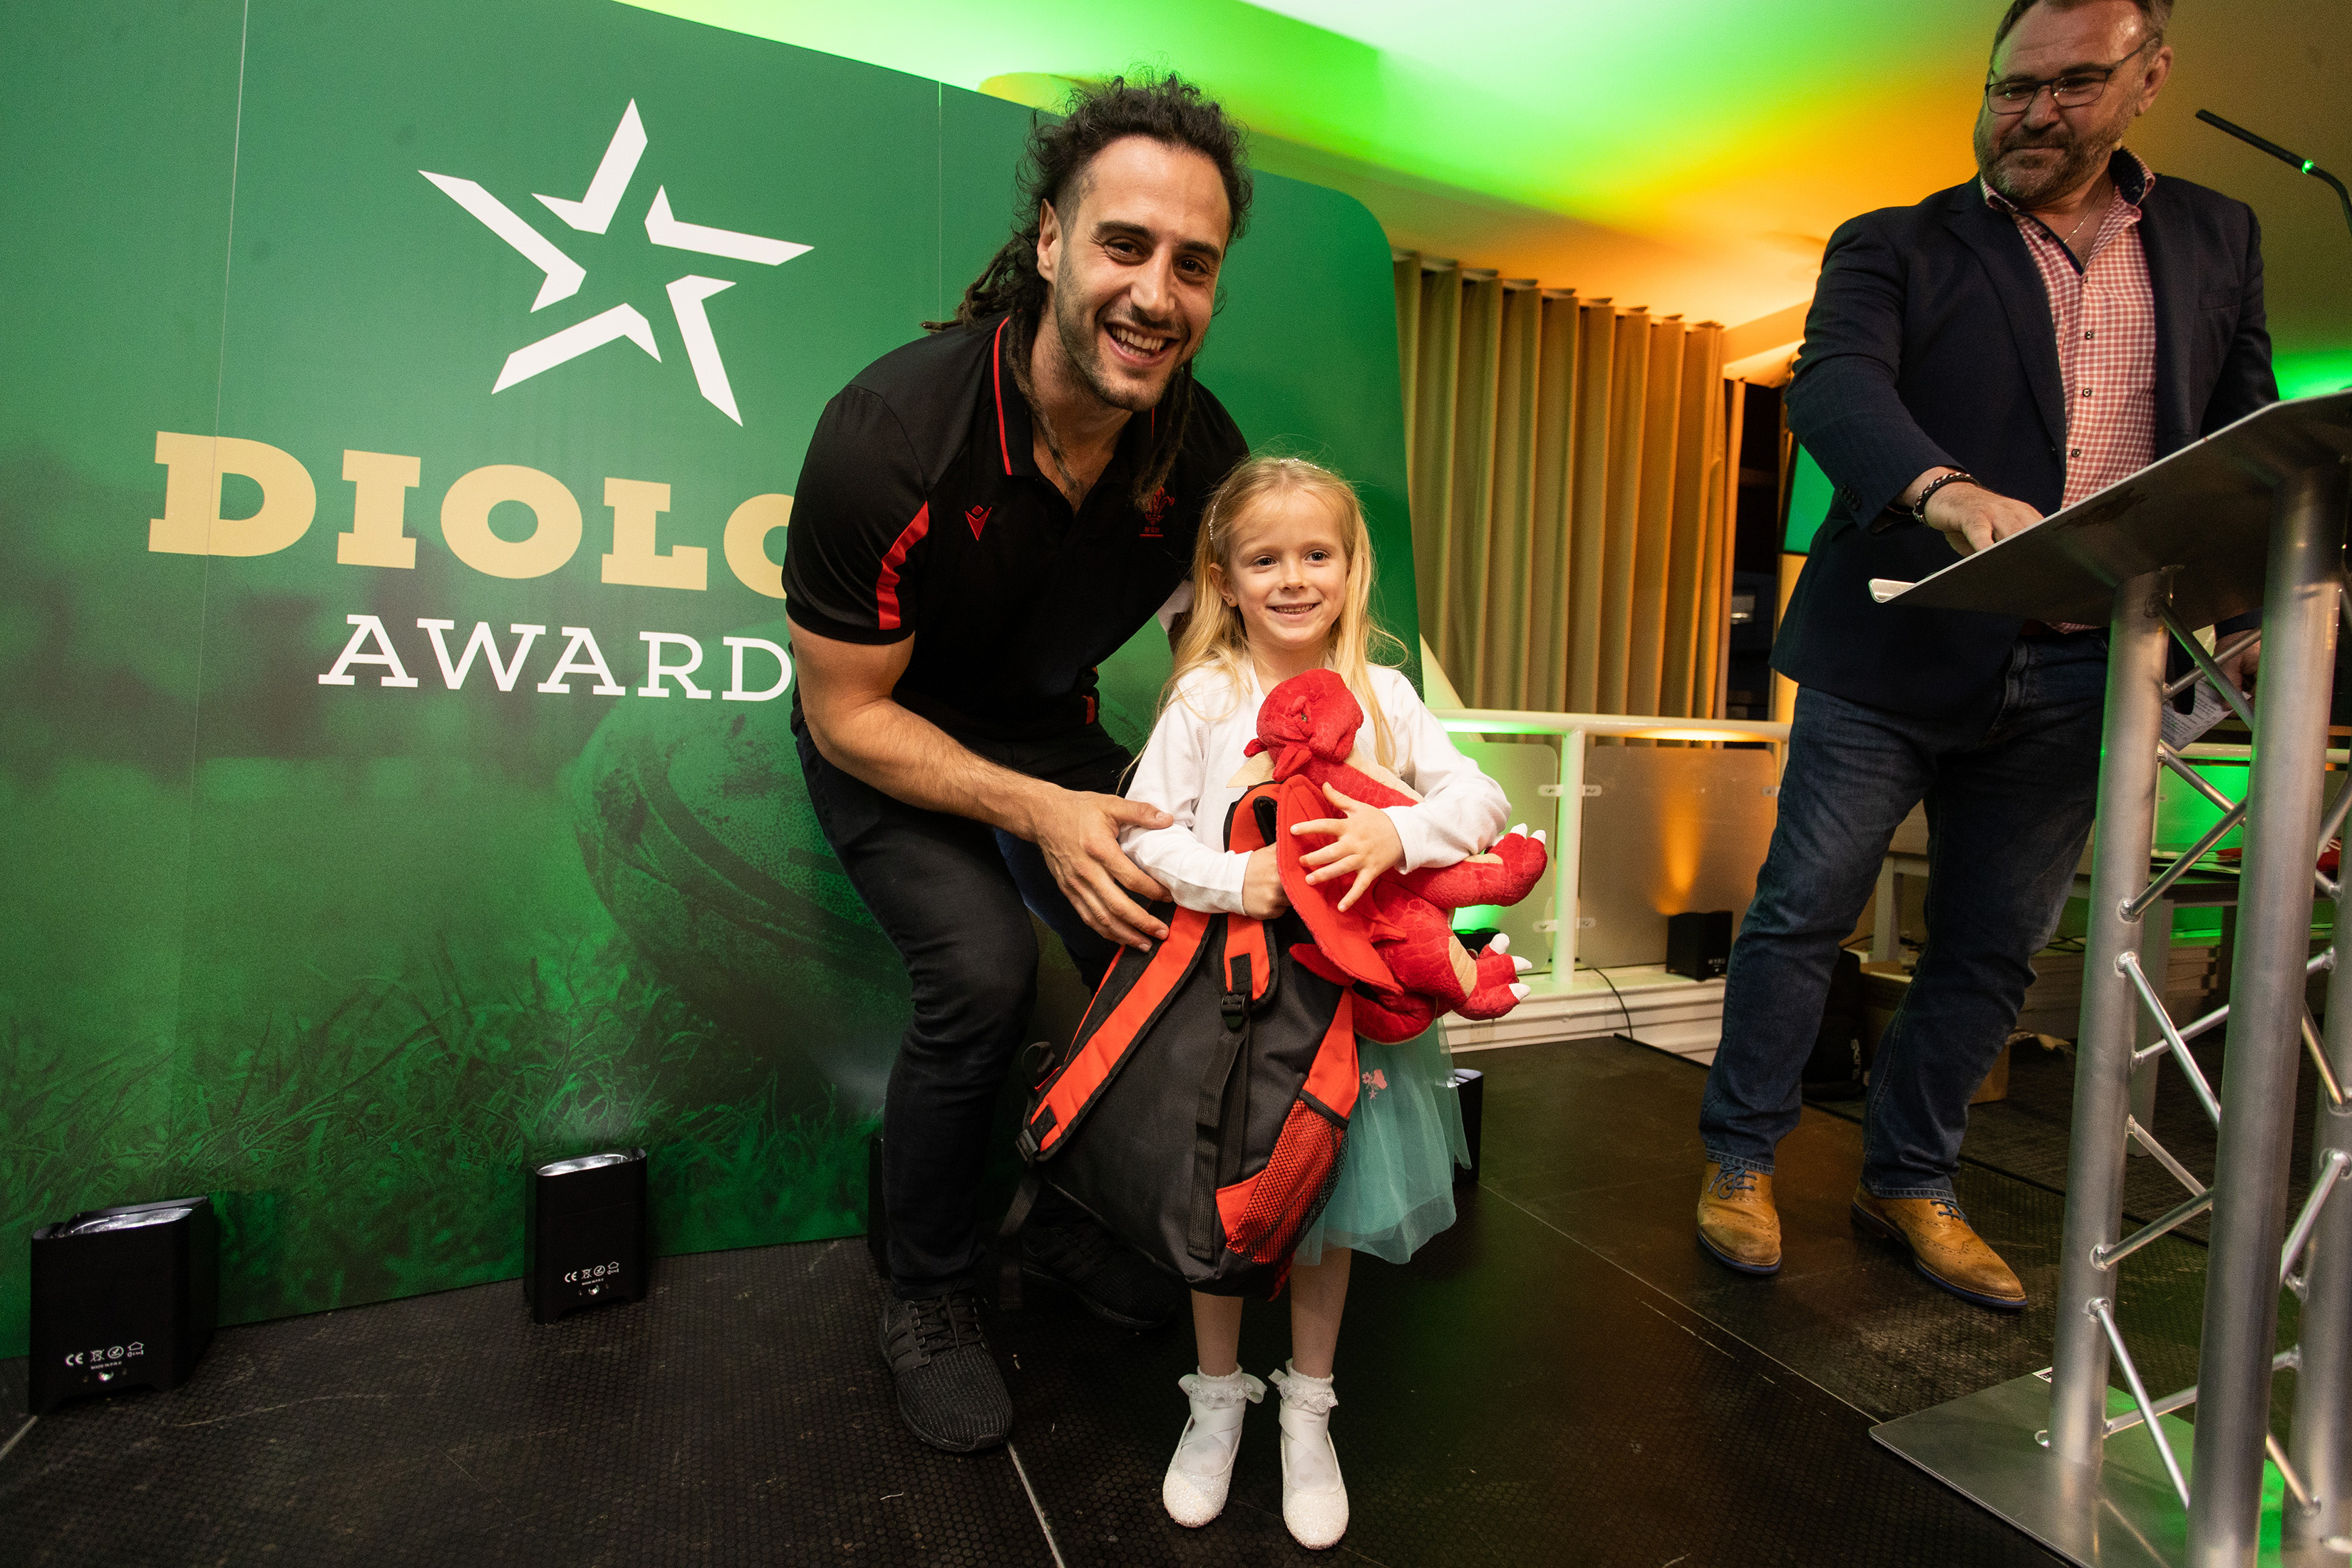 A Night to Celebrate the Remarkable Volunteers in Welsh Rugby